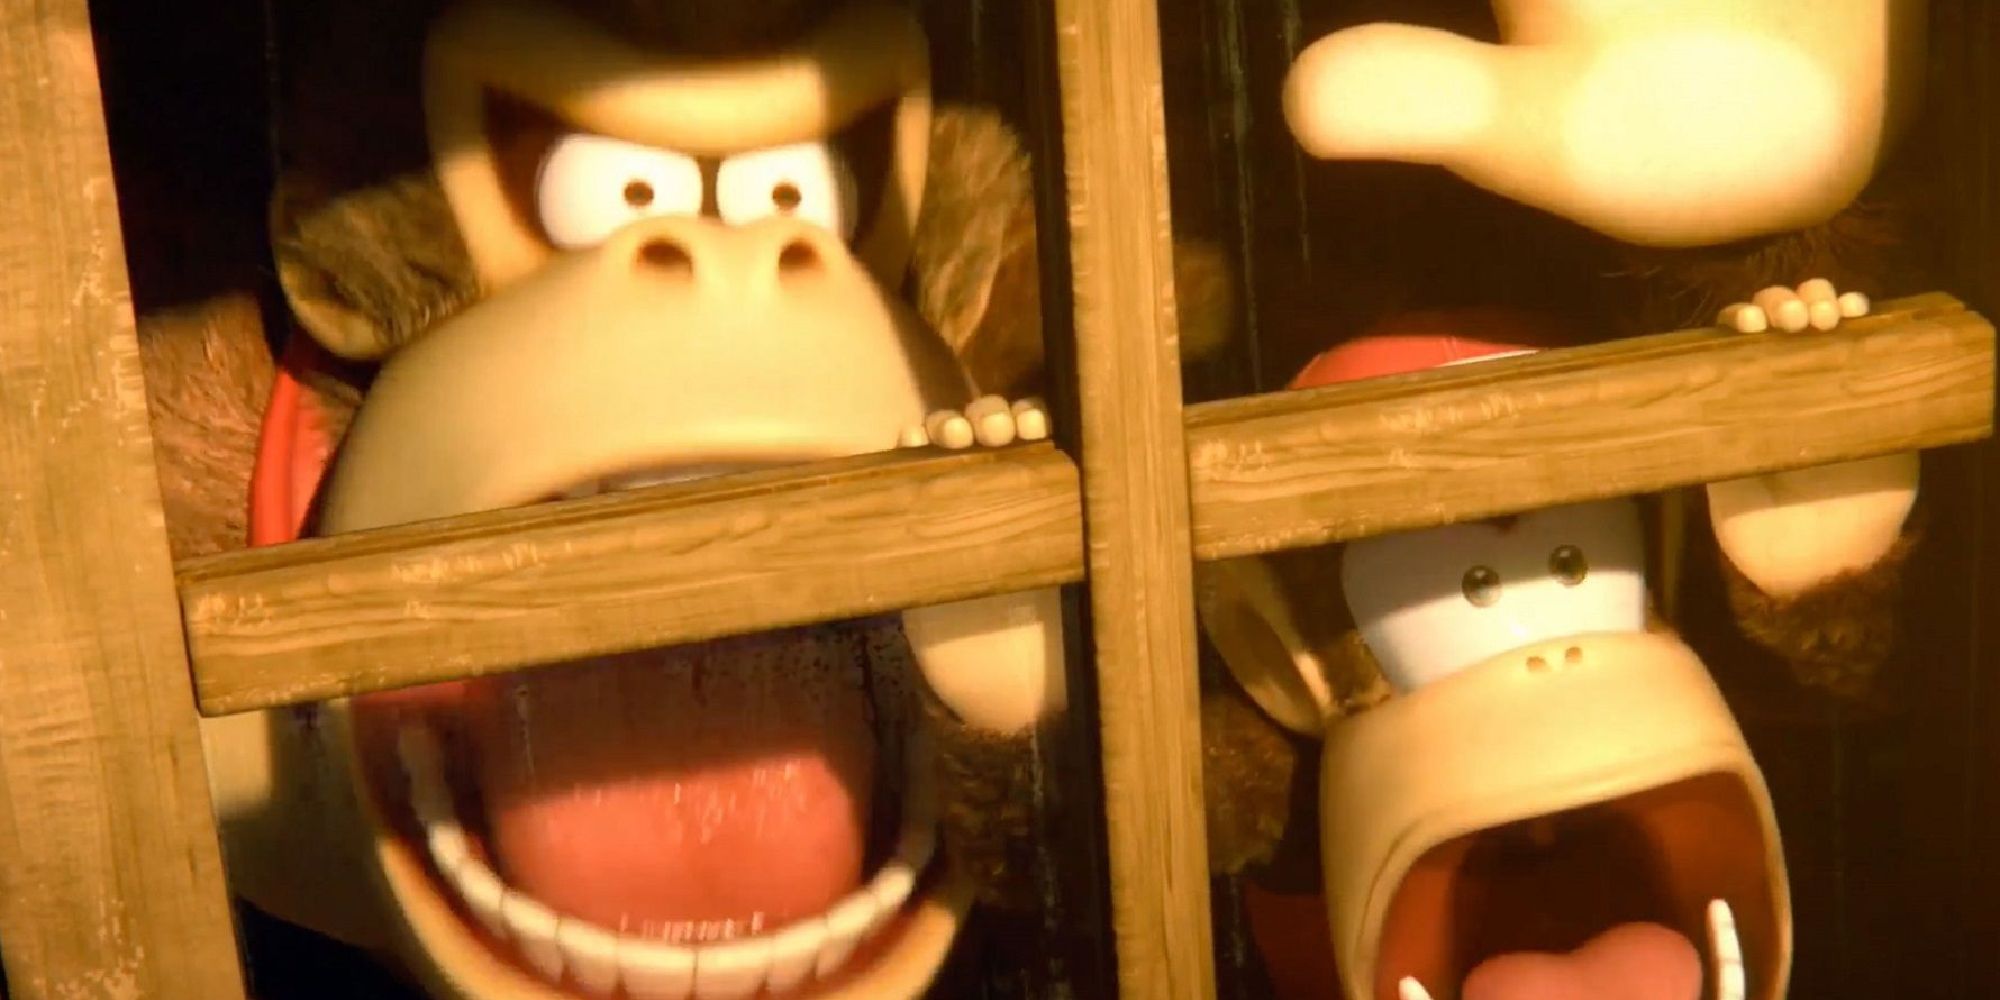 Donkey Kong and Diddy Kong look out of their window with shocked and terrified expressions